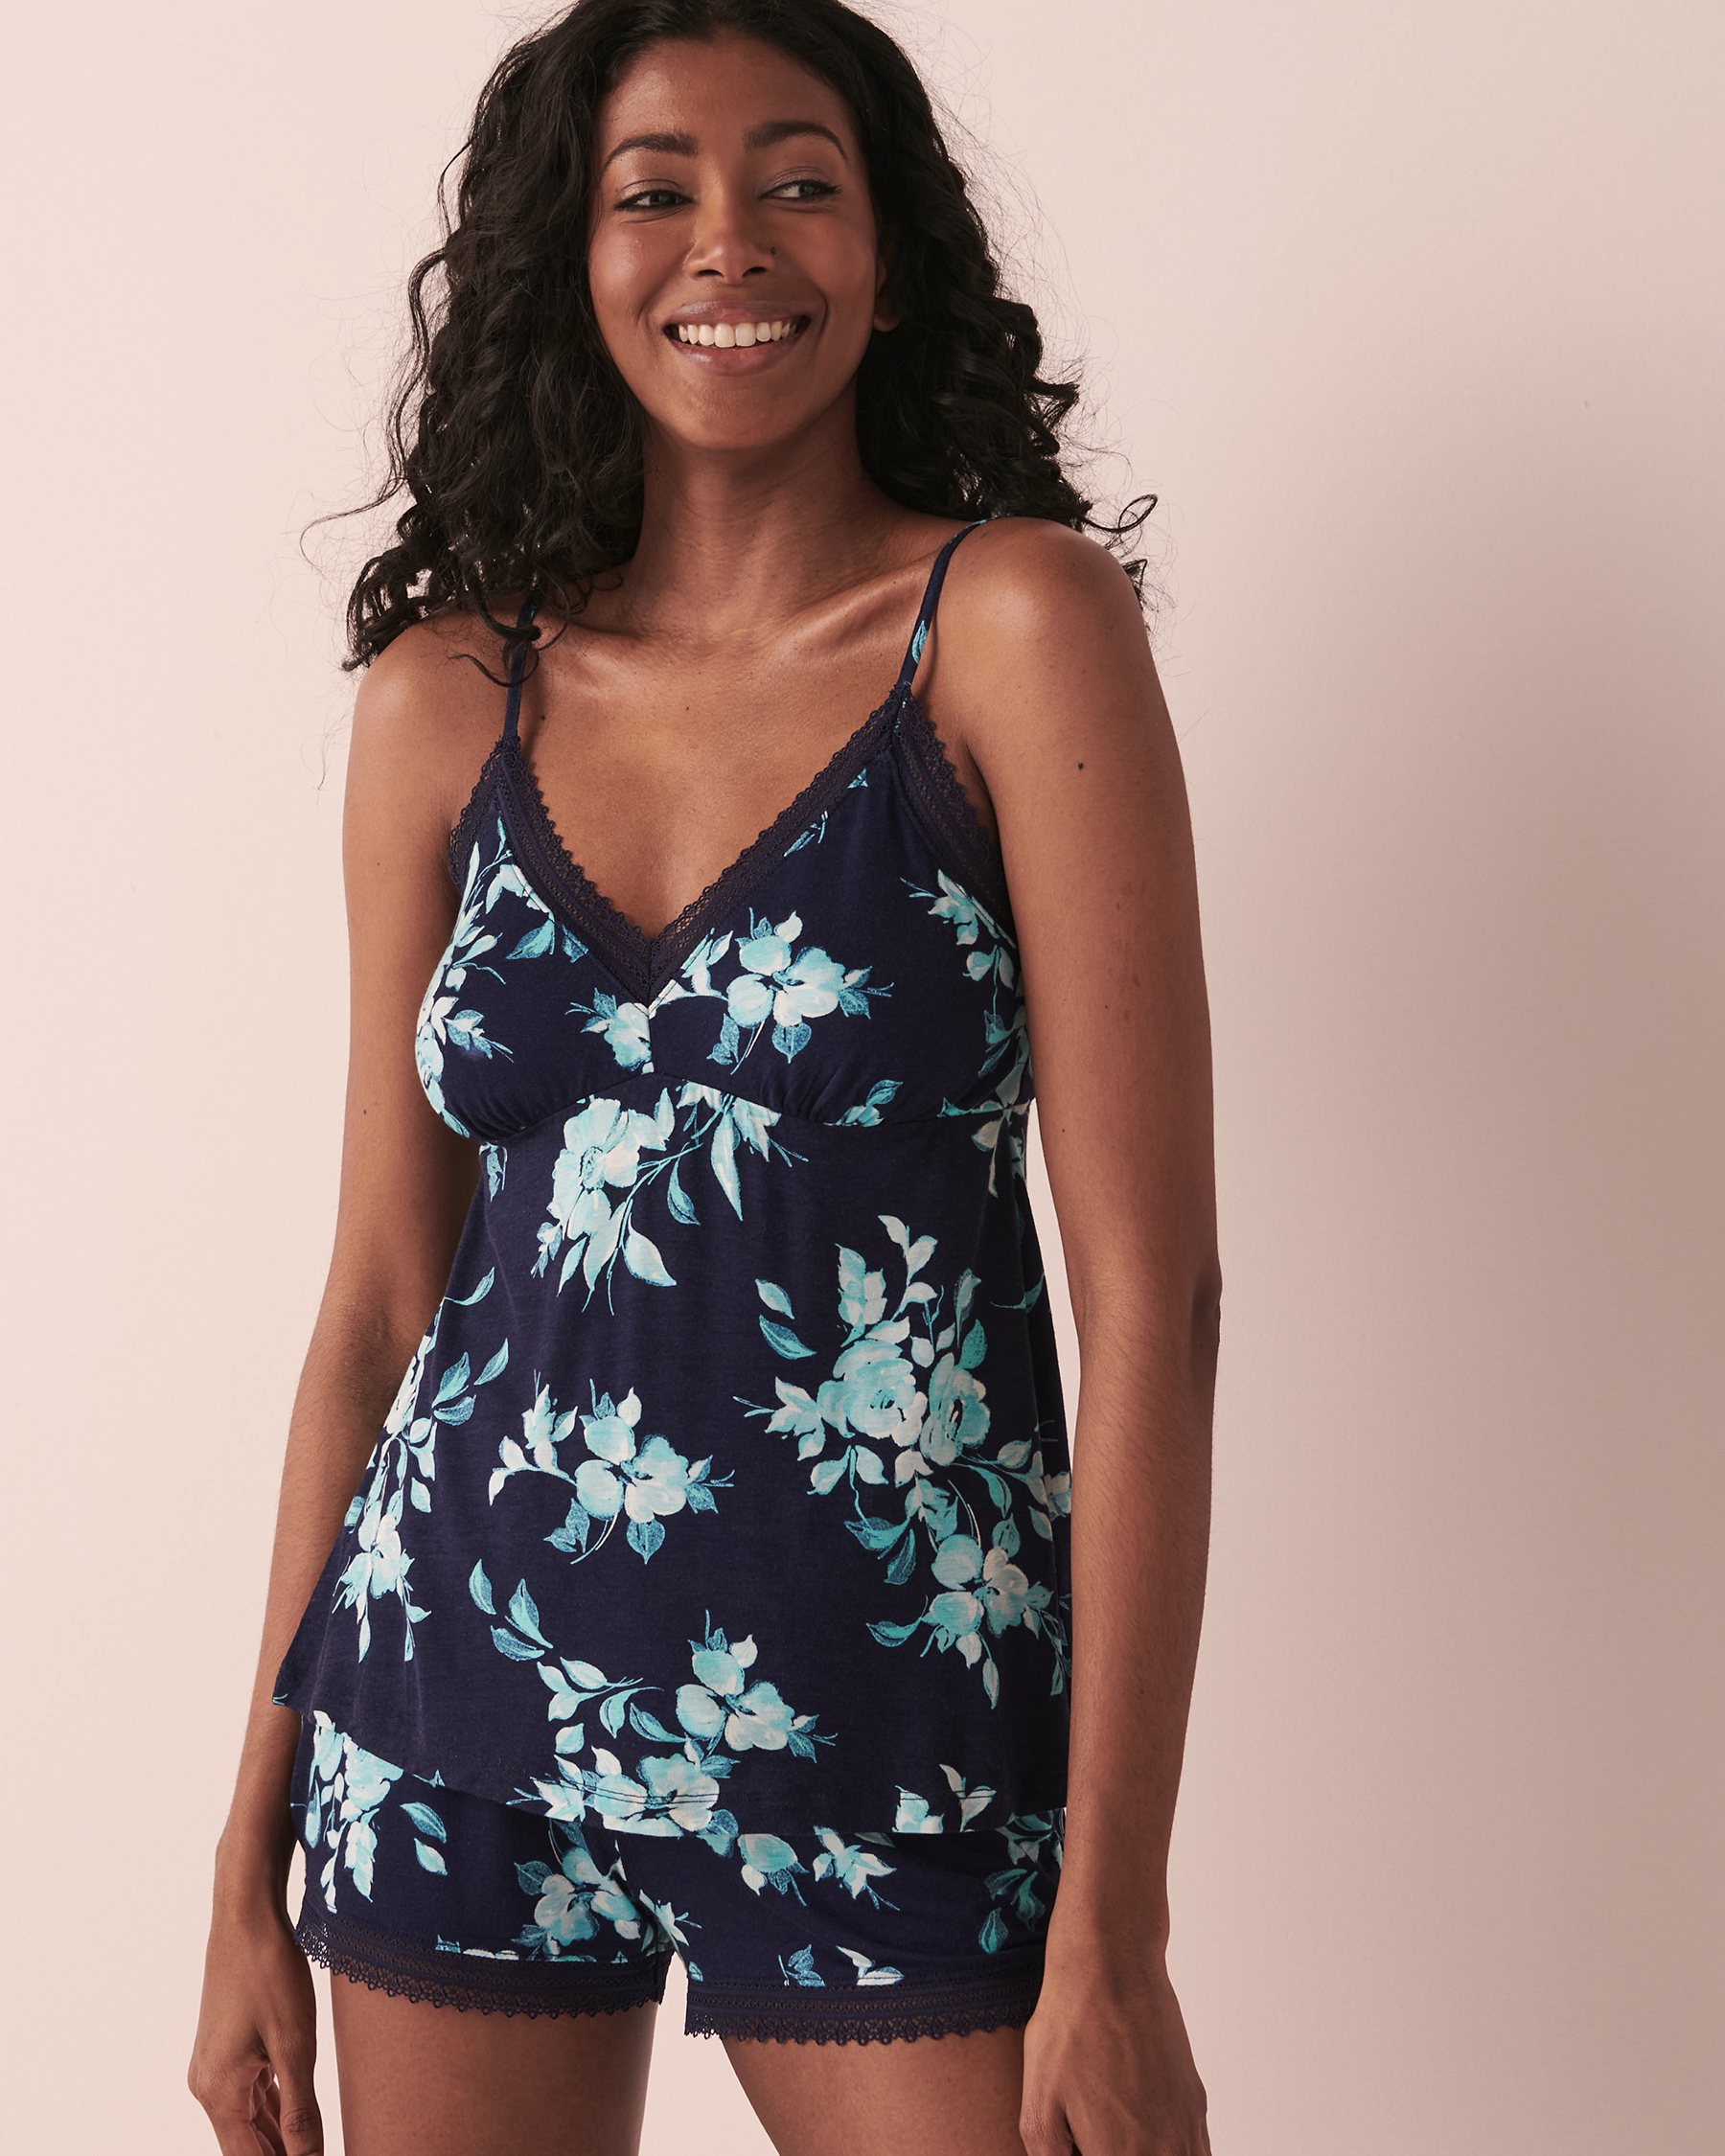 Soft Jersey Lace Trim Cami - Navy floral